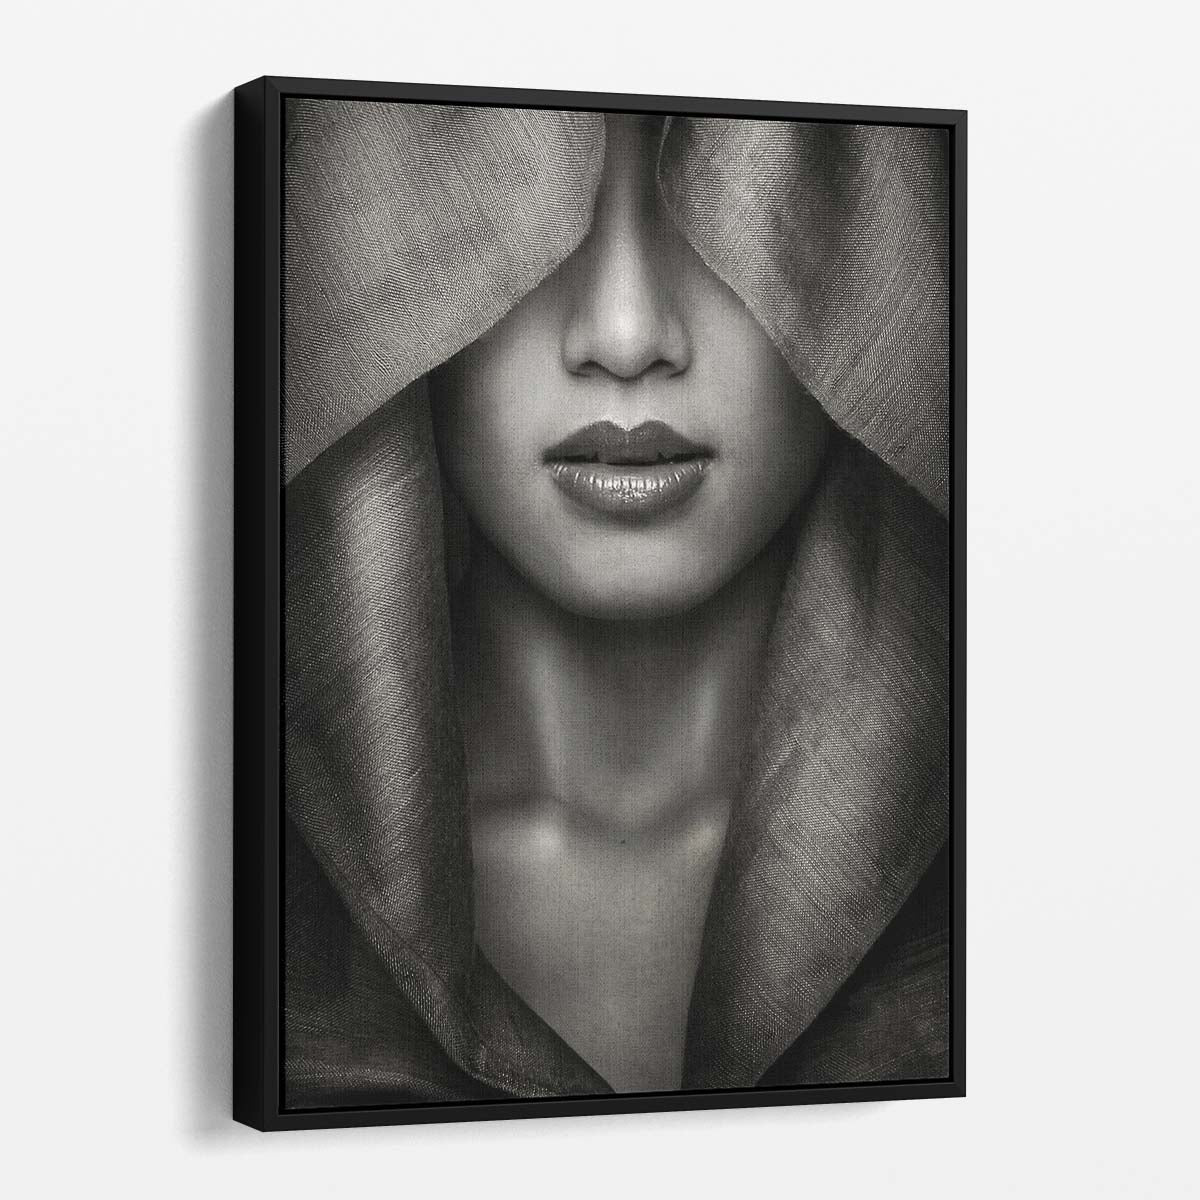 Monochrome Hooded Woman Portrait Photography Wall Art by Luxuriance Designs, made in USA